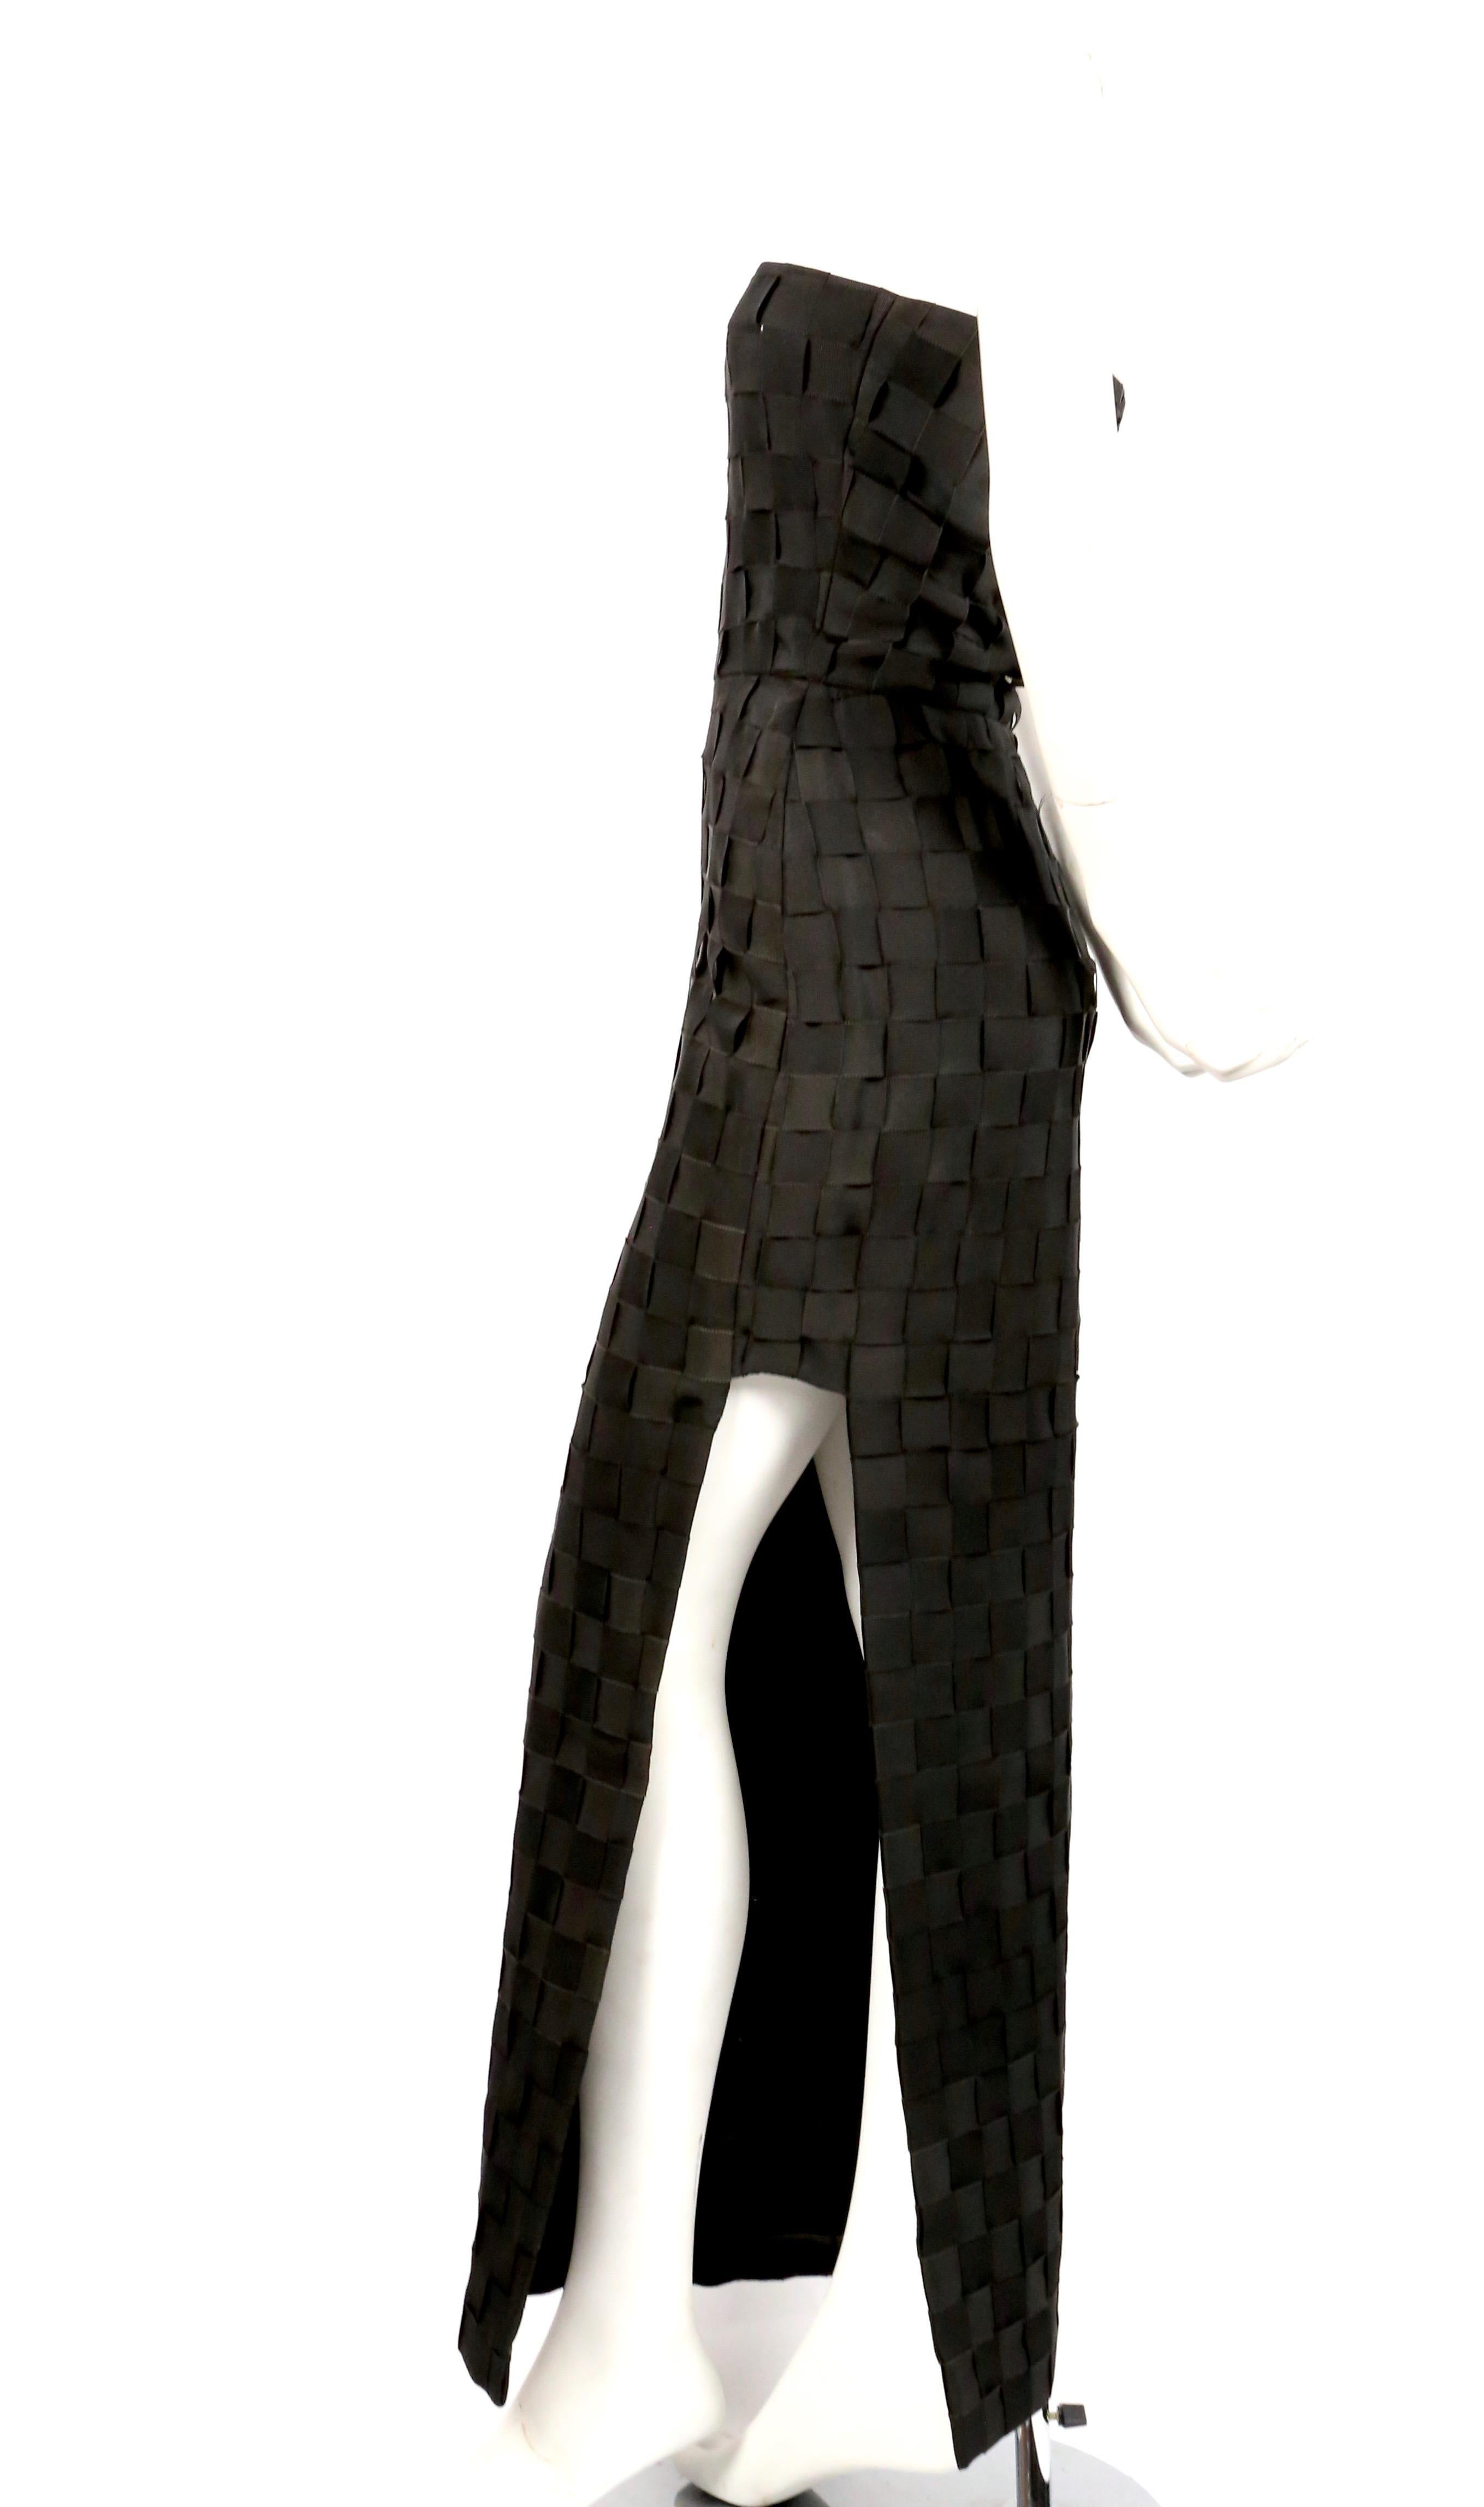 Black woven grosgrain ribbon strapless dress with cut out at left leg designed by Gianni Versace for the Gianni Versace Couture label dating to the early 1990's. Best fits a US 2. Approximate measurements: bust 31.5-32